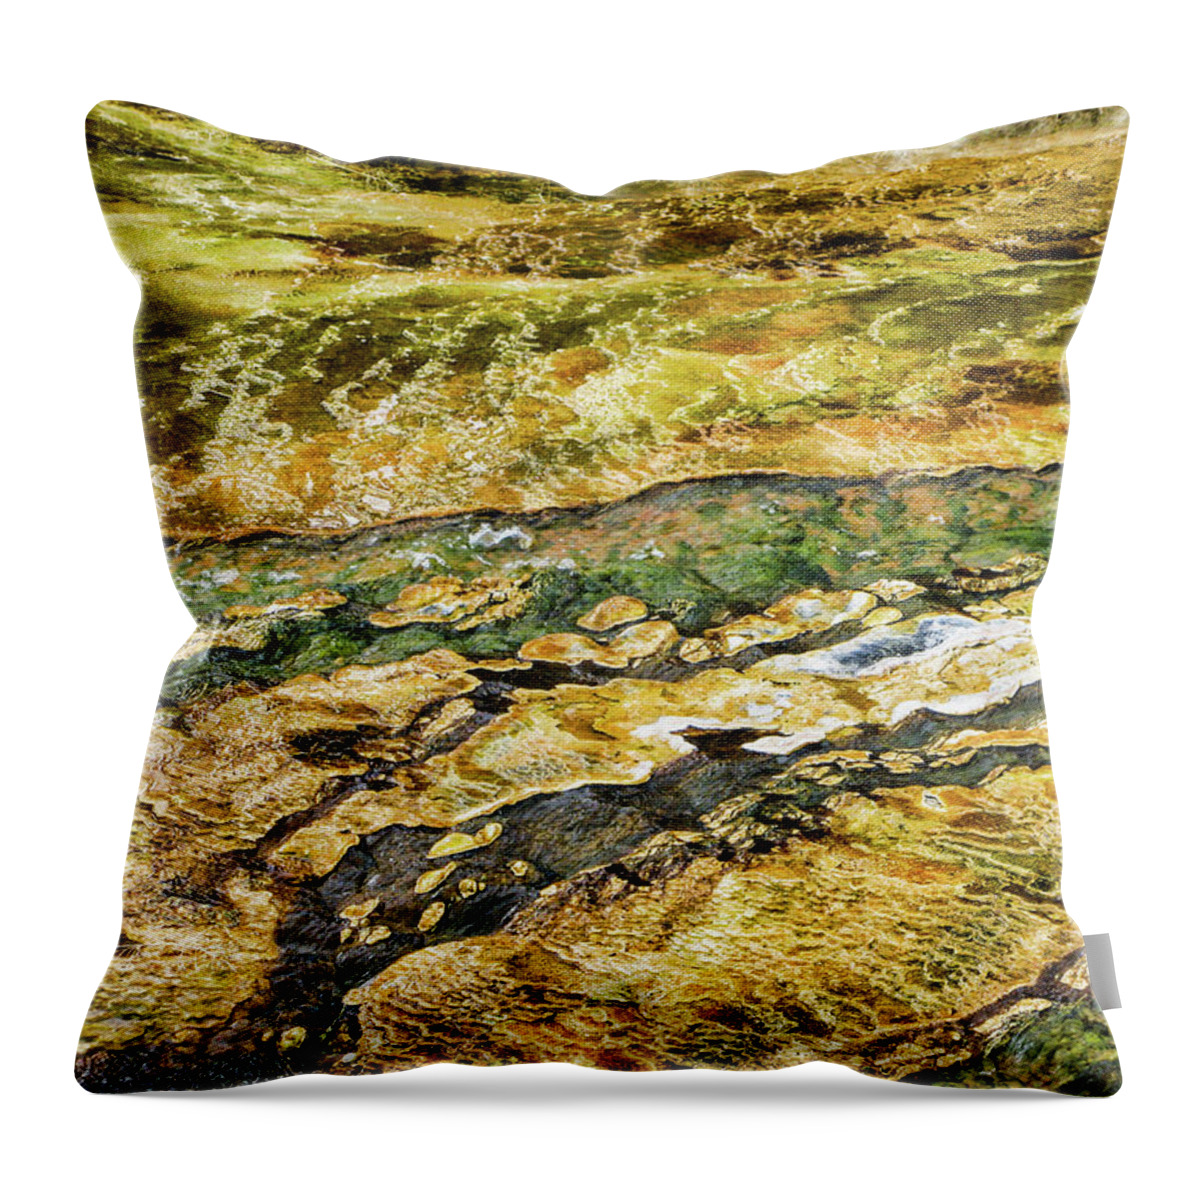 Abstract Throw Pillow featuring the photograph Yellowstone 2 by Segura Shaw Photography